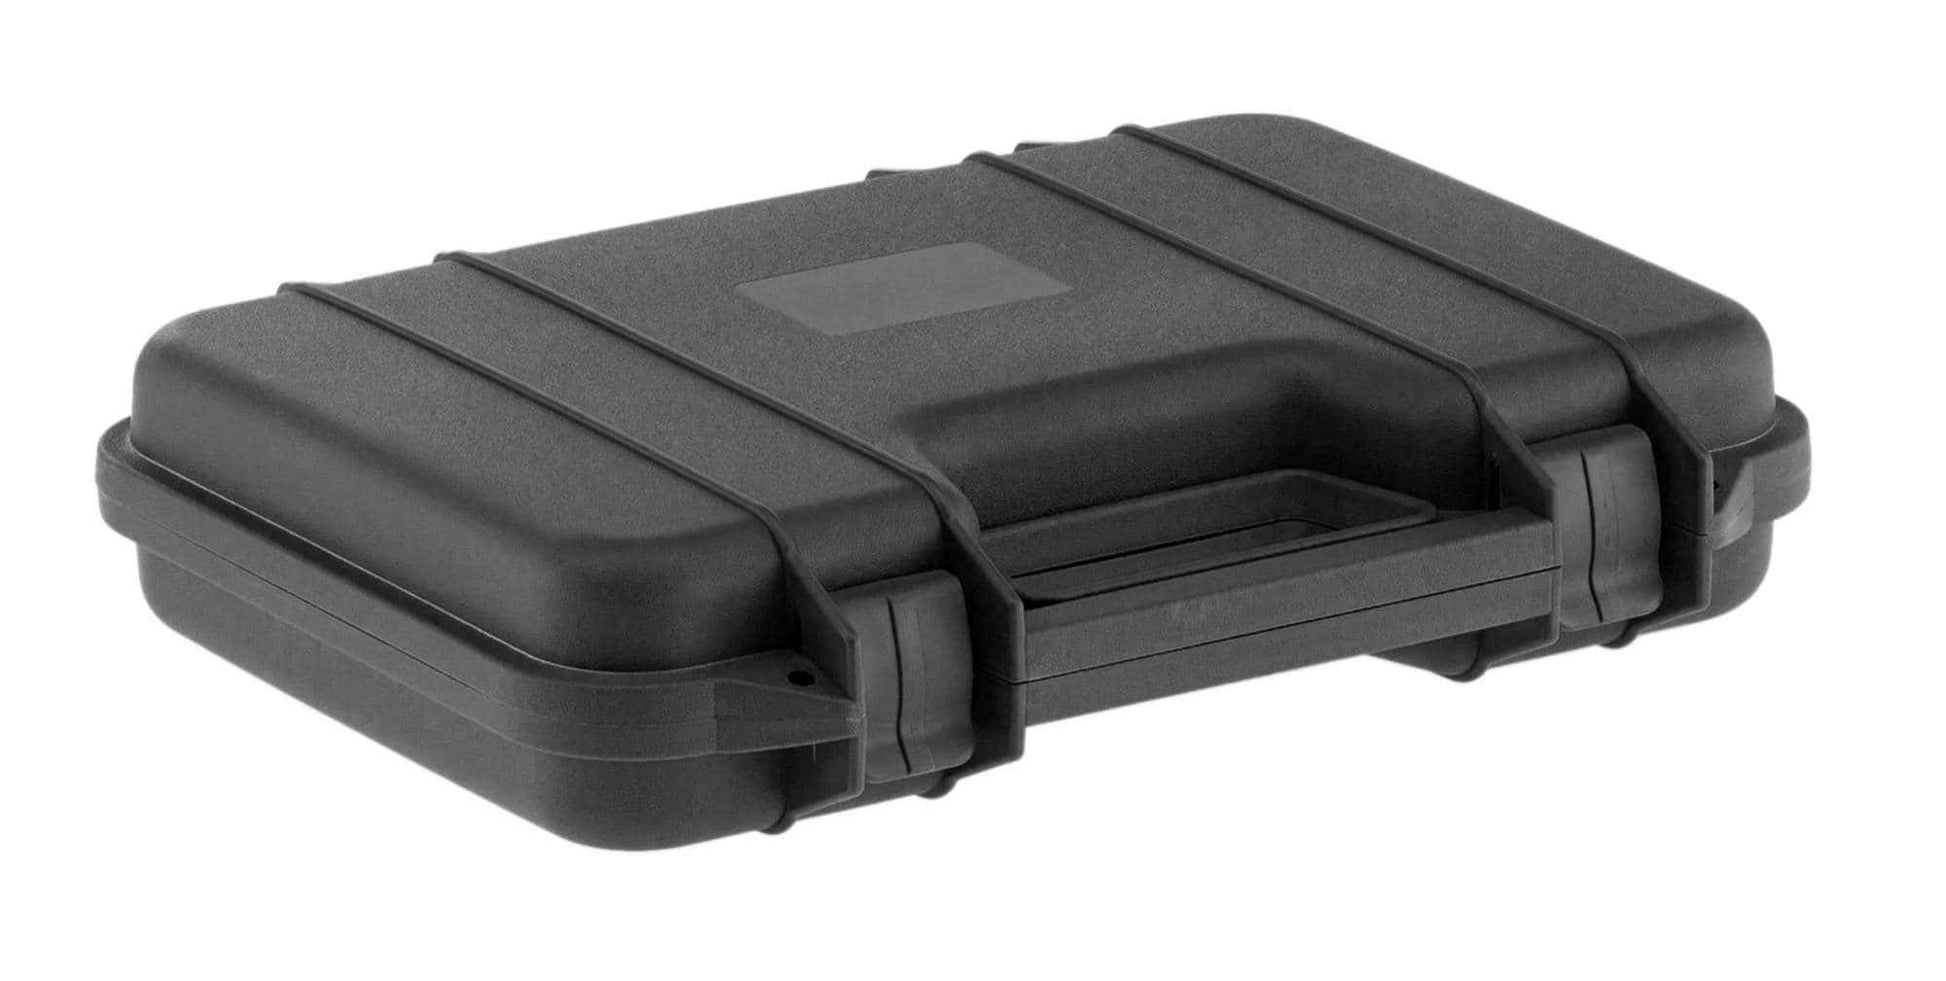 Pack airsoft pistolet APX CO2 1,5 J - Beretta-T.A DEFENSE